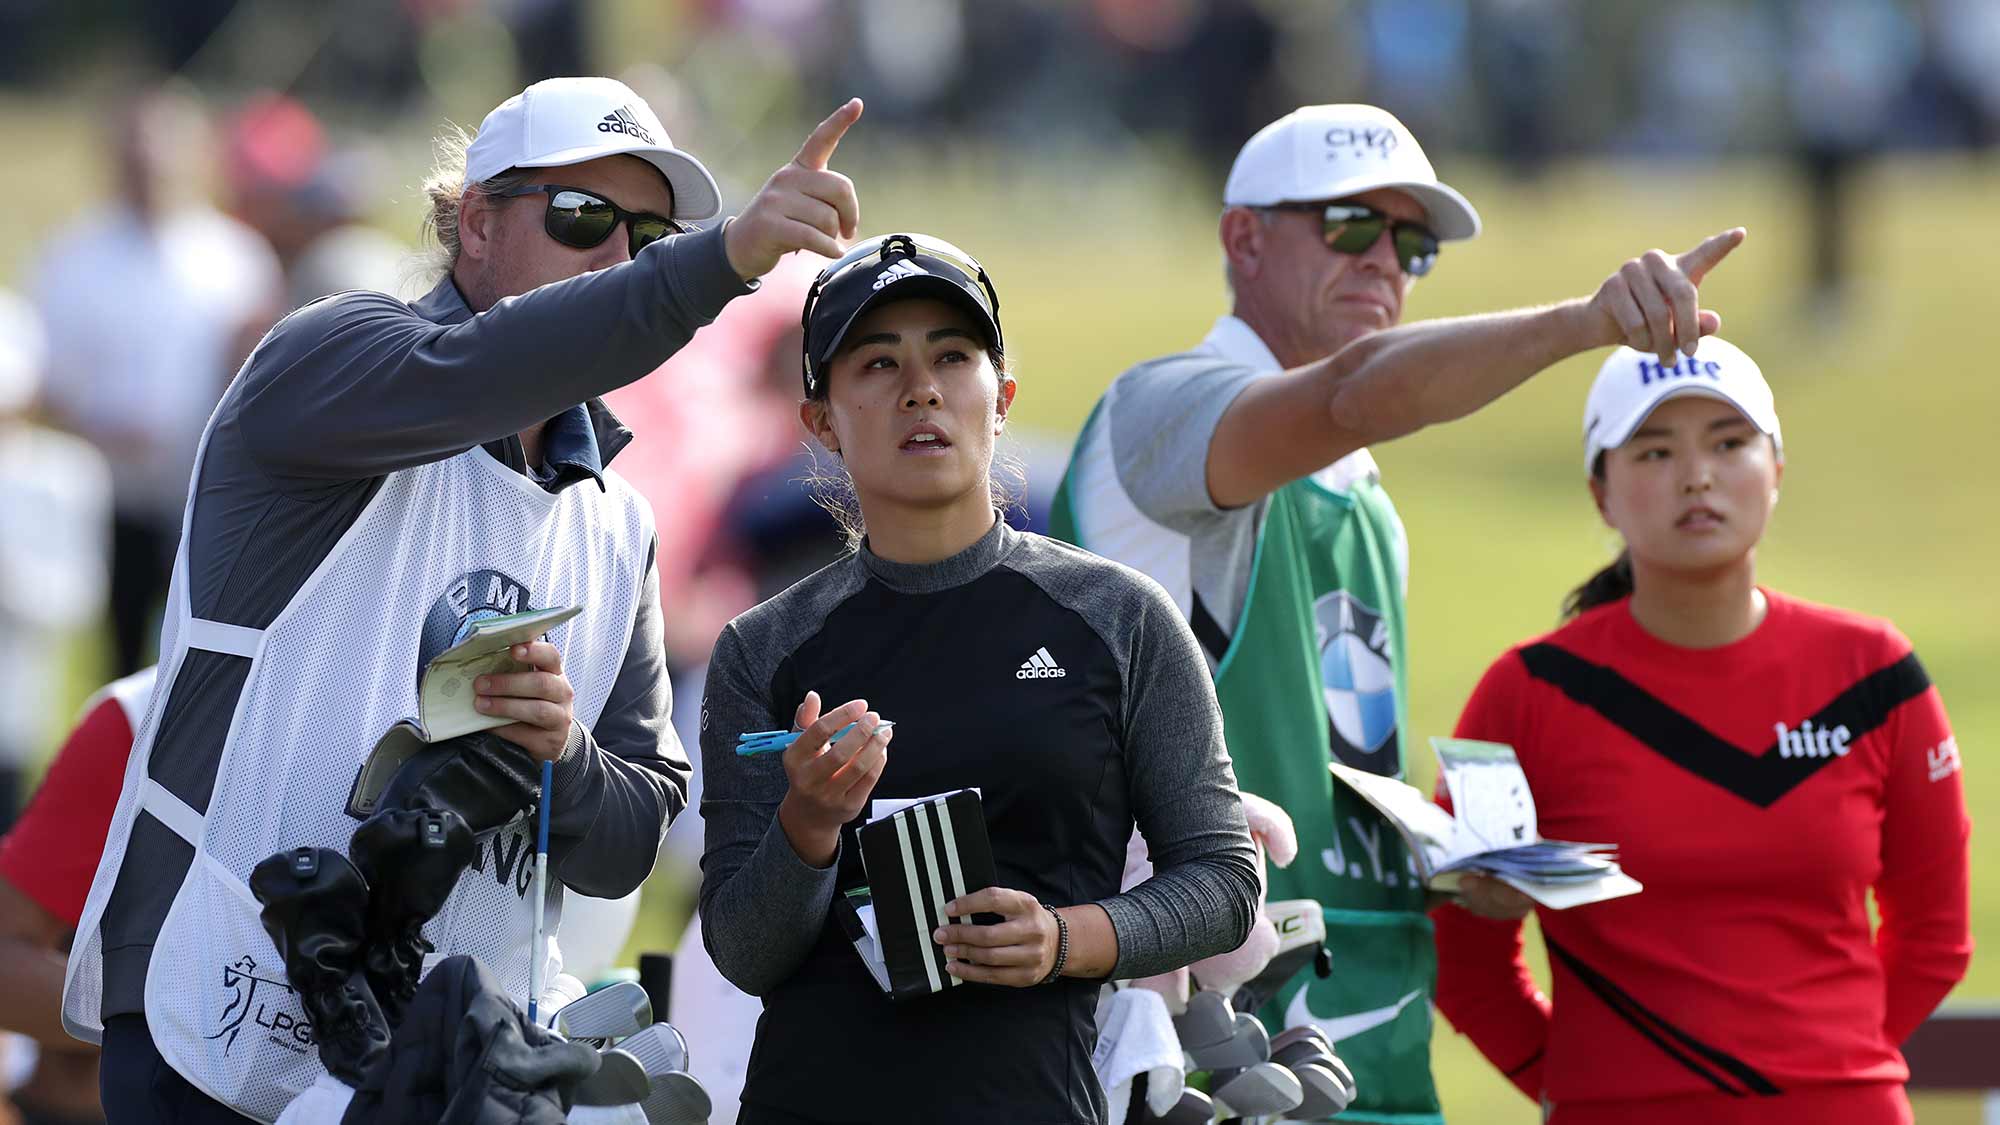 Danielle Kang and Jin Young Ko on the fifteen hole during Round 2 of 2019 BMW Ladies Championship at LPGA International Busan on October 25, 2019 in Busan, Republic of Korea